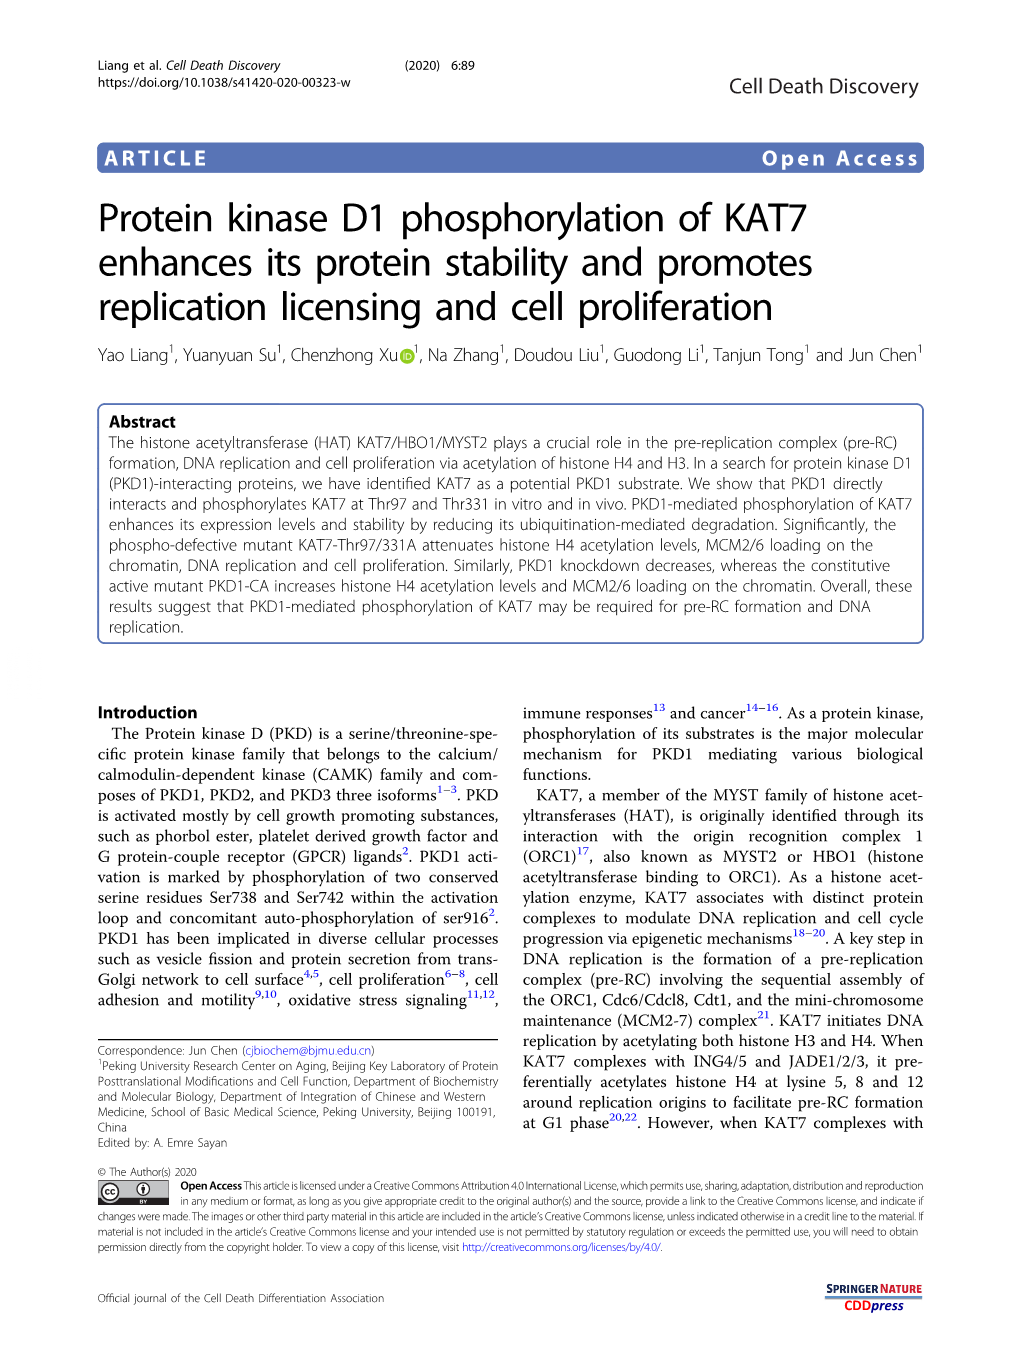 Protein Kinase D1 Phosphorylation of KAT7 Enhances Its Protein Stability and Promotes Replication Licensing and Cell Proliferati